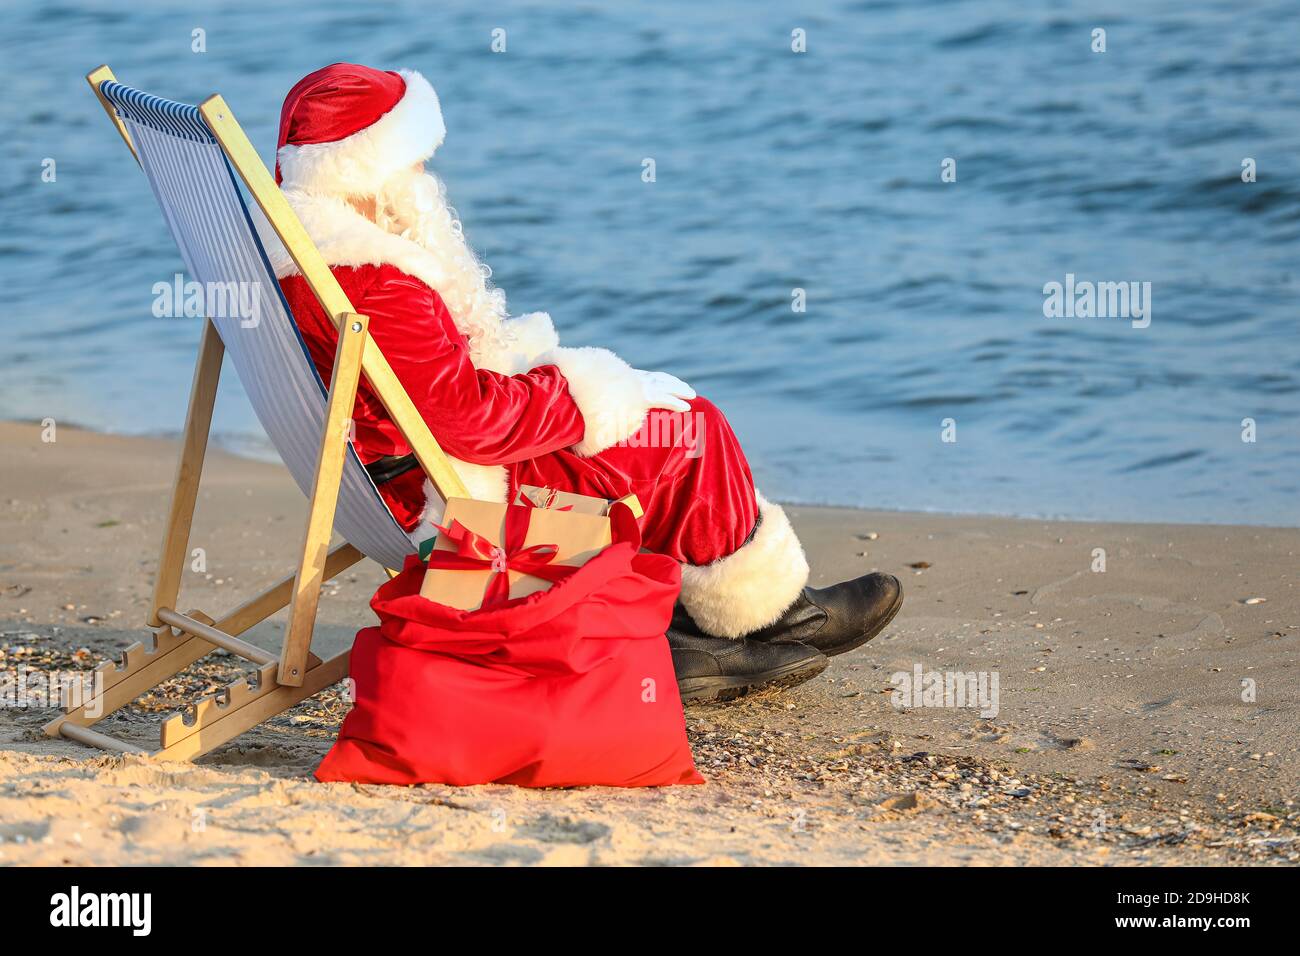 Santa Claus with Christmas gifts in bag resting on beach Stock Photo ...